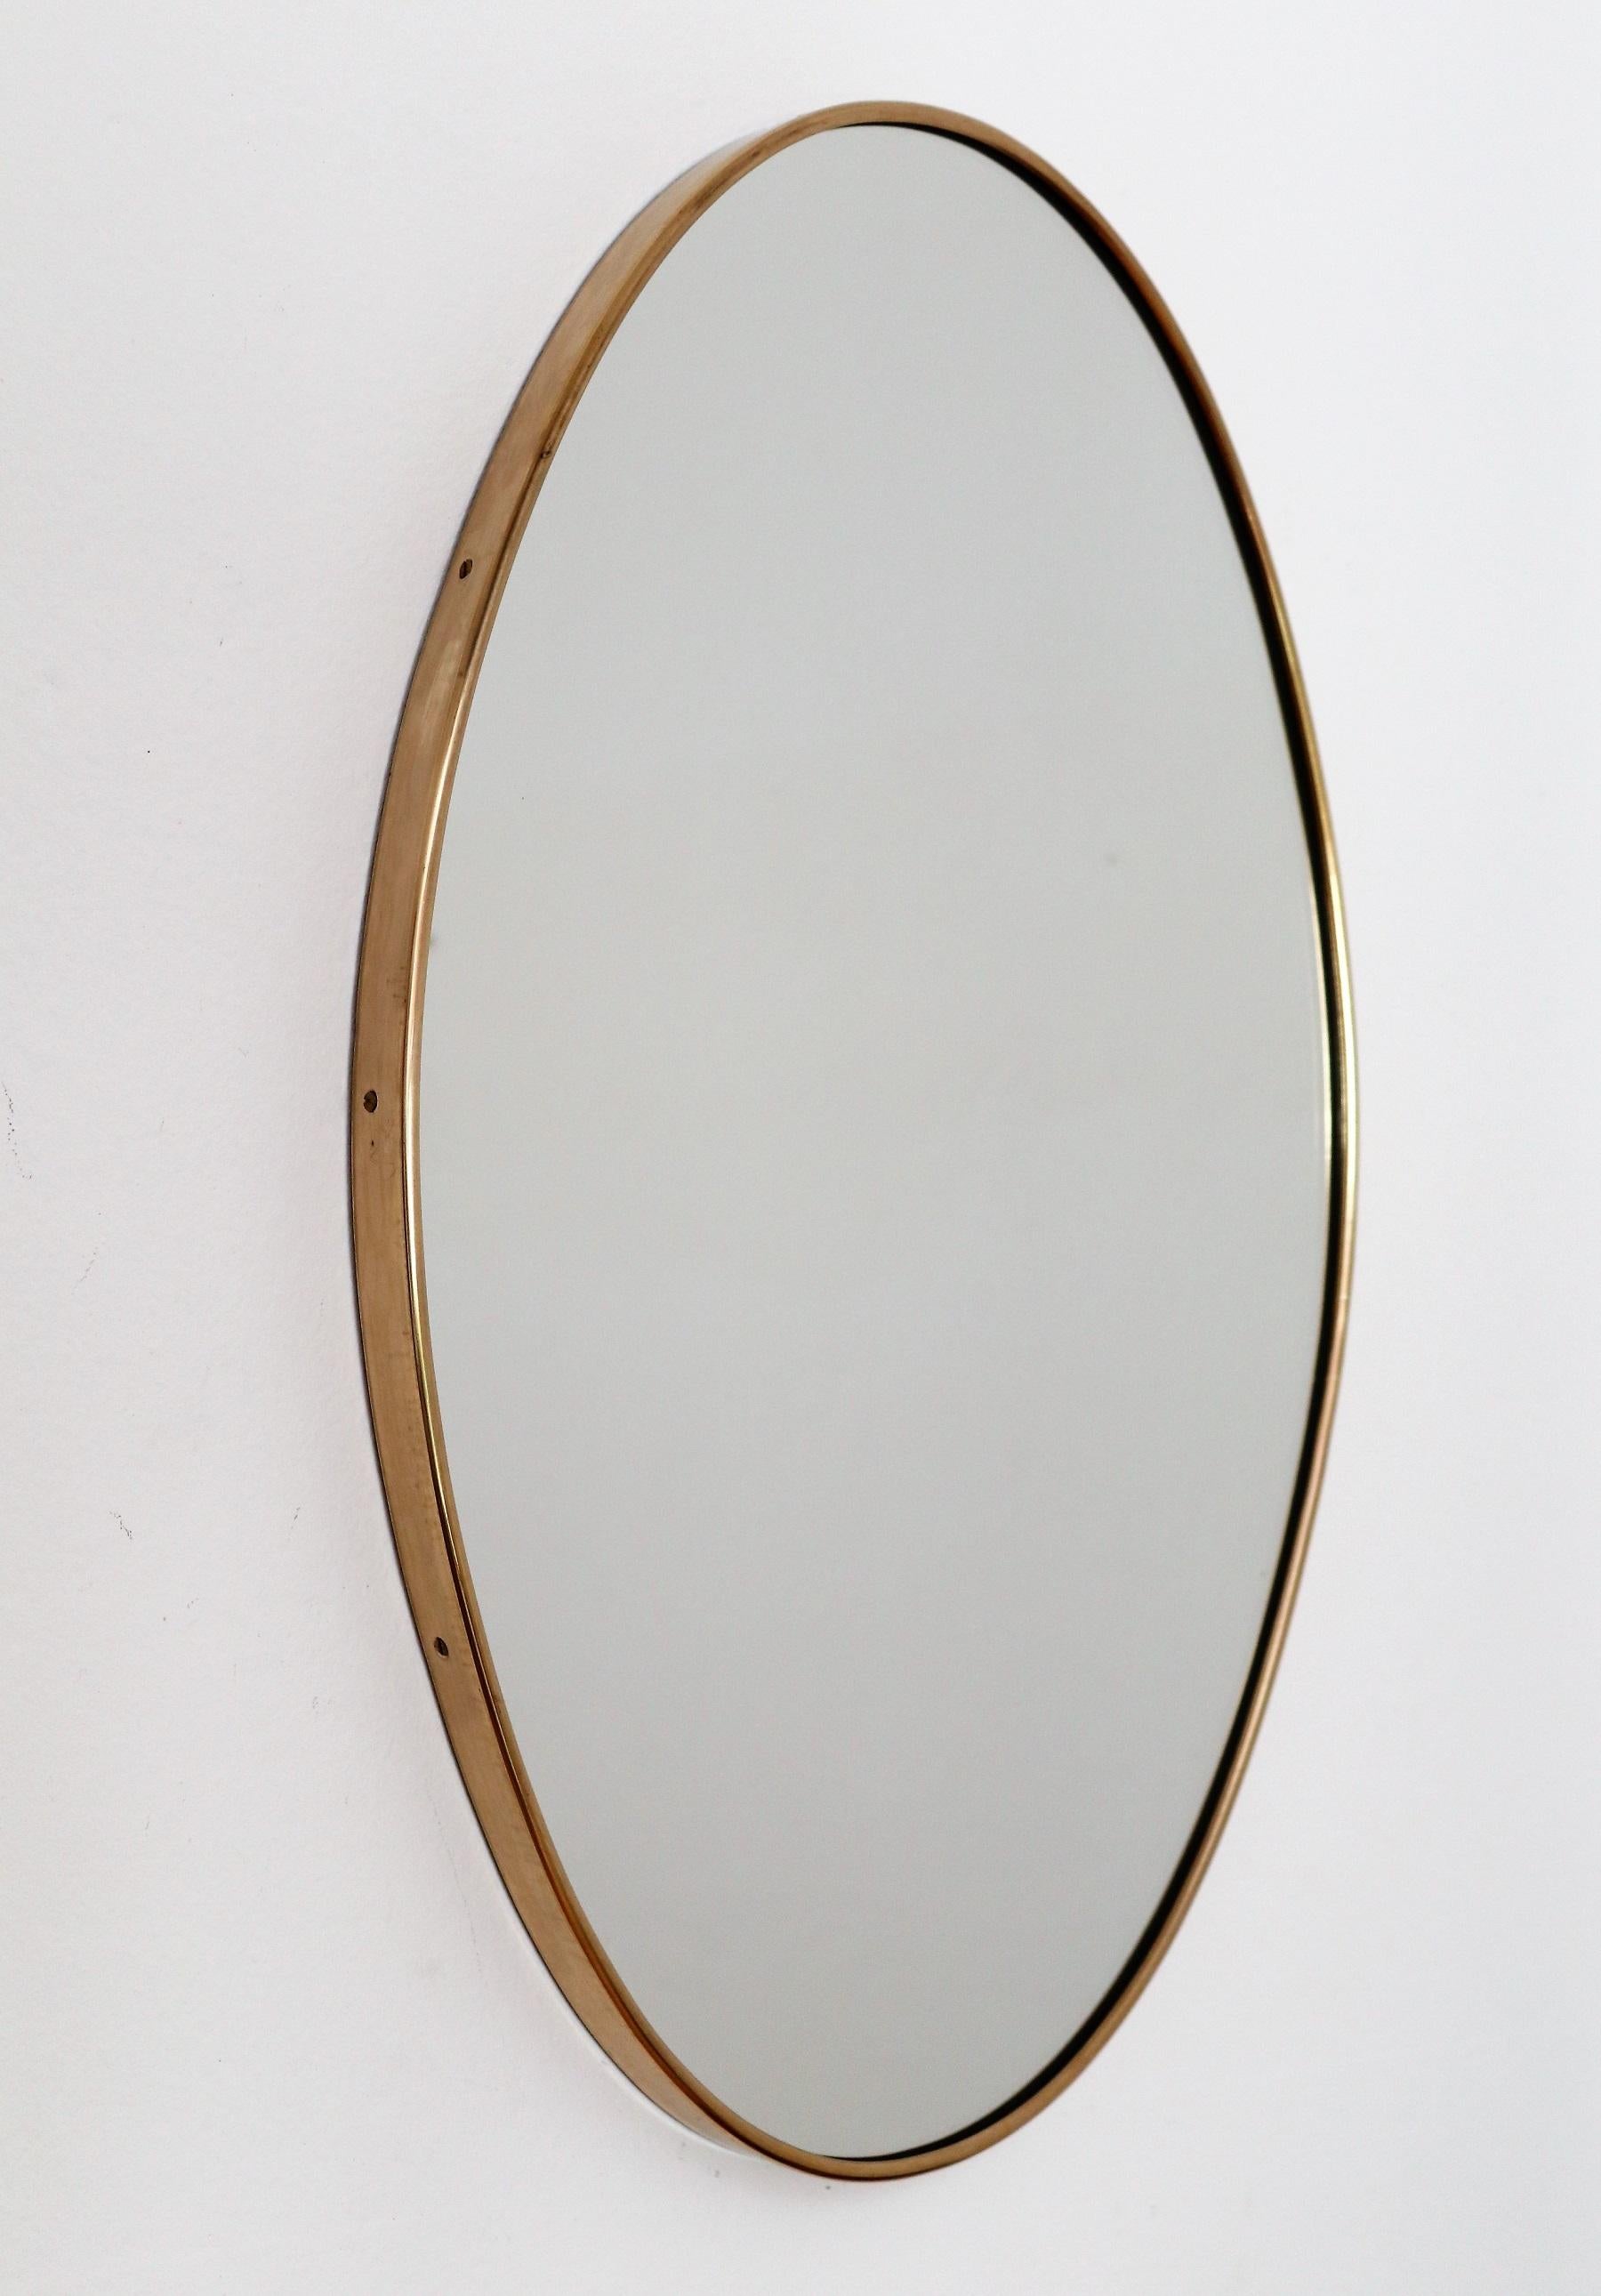 Italian Midcentury Wall Mirror with Original Brass Frame, 1950s at 1stDibs